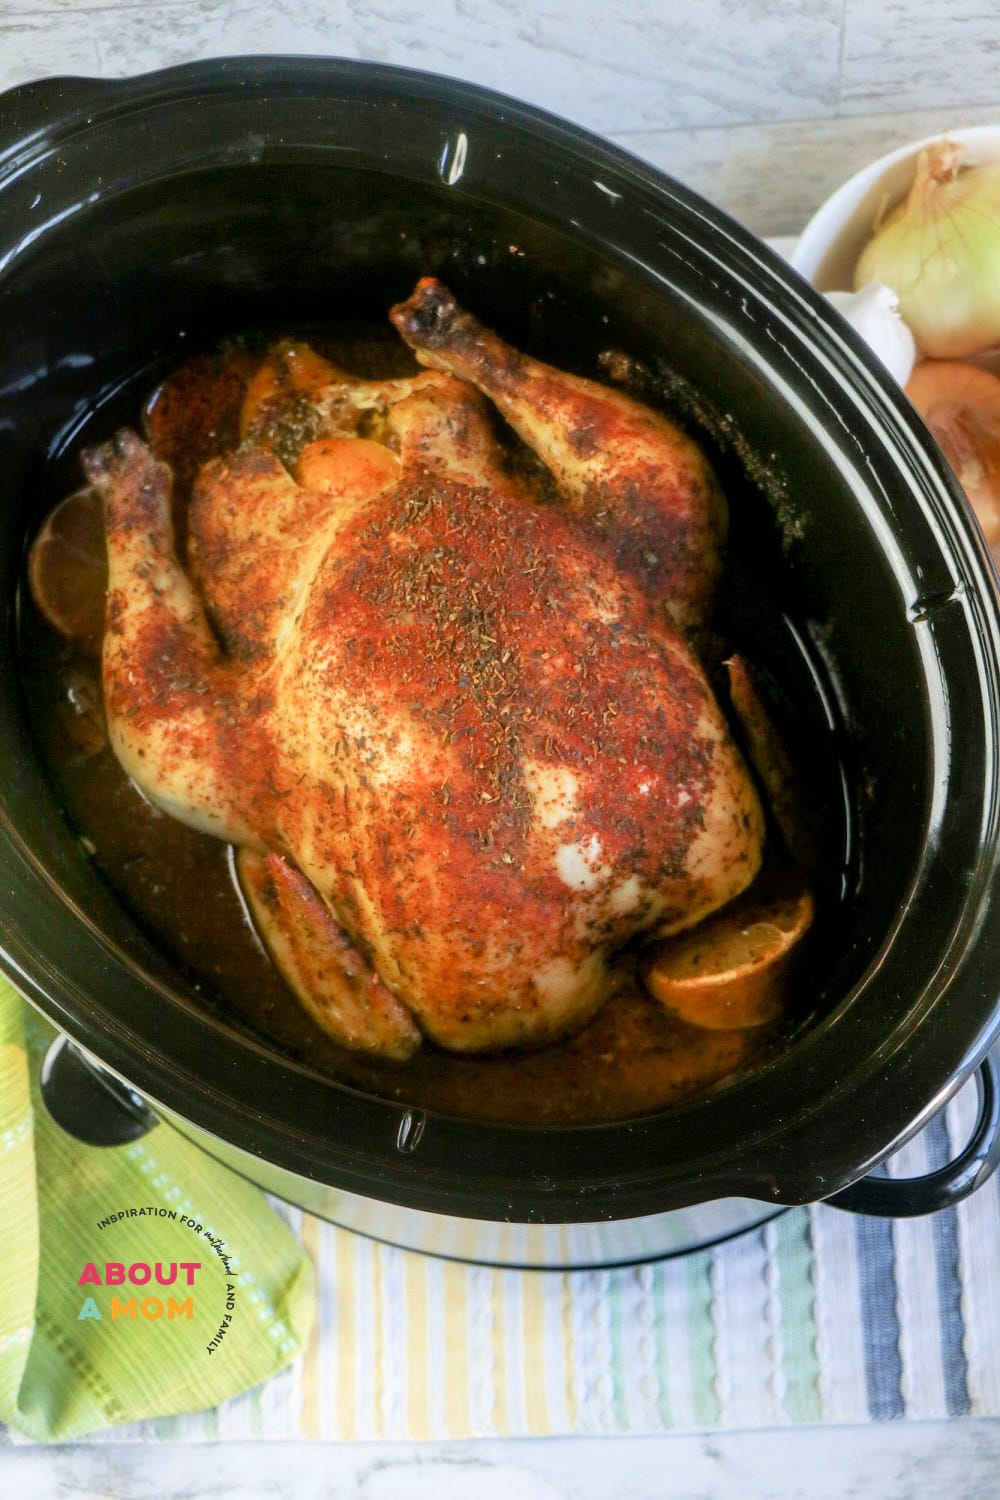 If your looking for a recipe to fill your significant other's heart with love and maybe ideas, then this recipe is for you. This moist and tender slow cooker whole chicken recipe is exactly what you need.